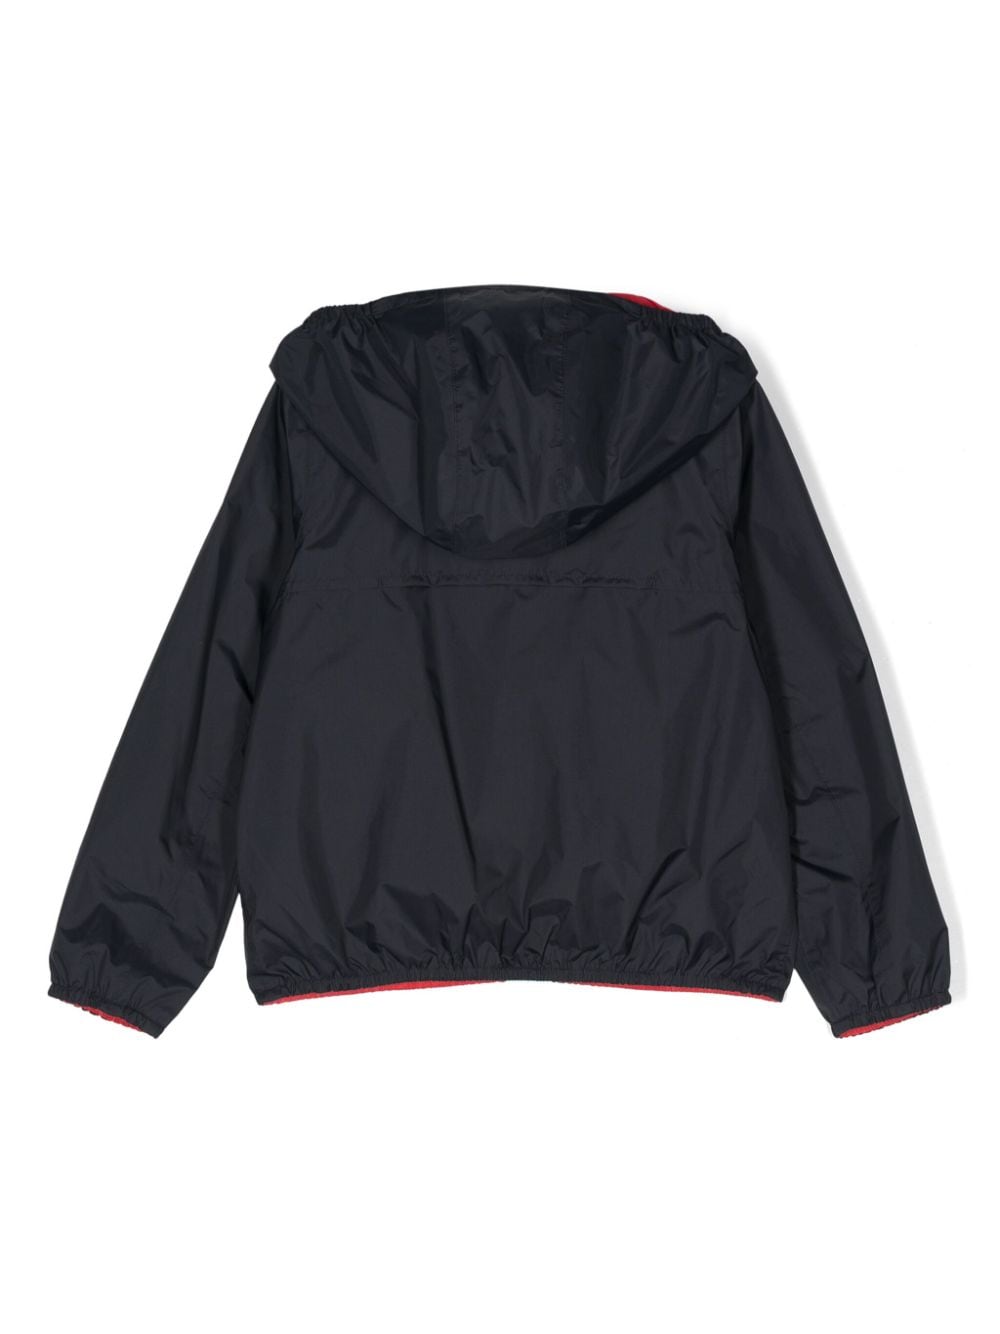 Blue and red jacket for boys with logo